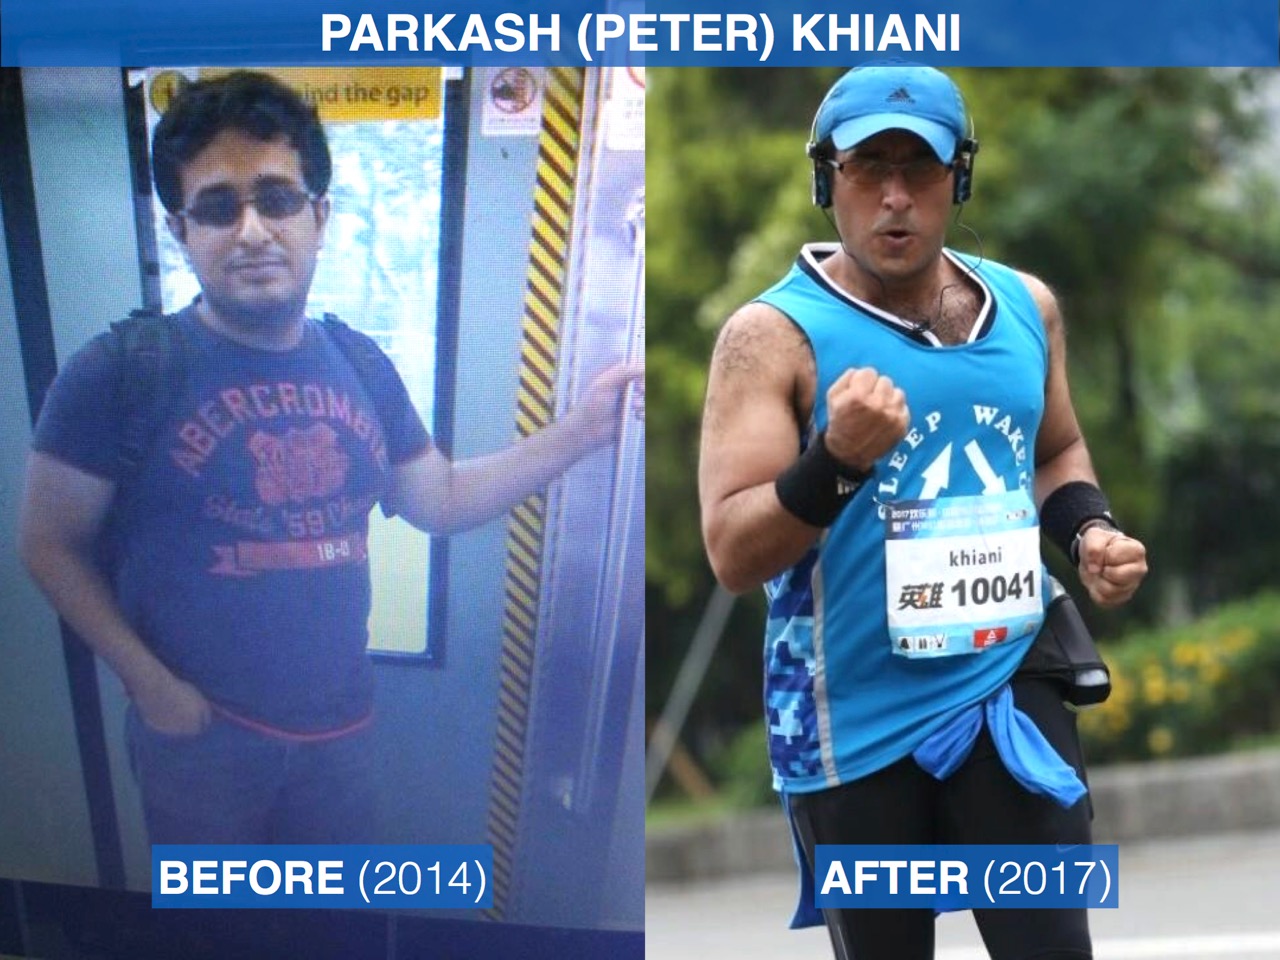 Peter-khiani-k2fit-peoples-choice